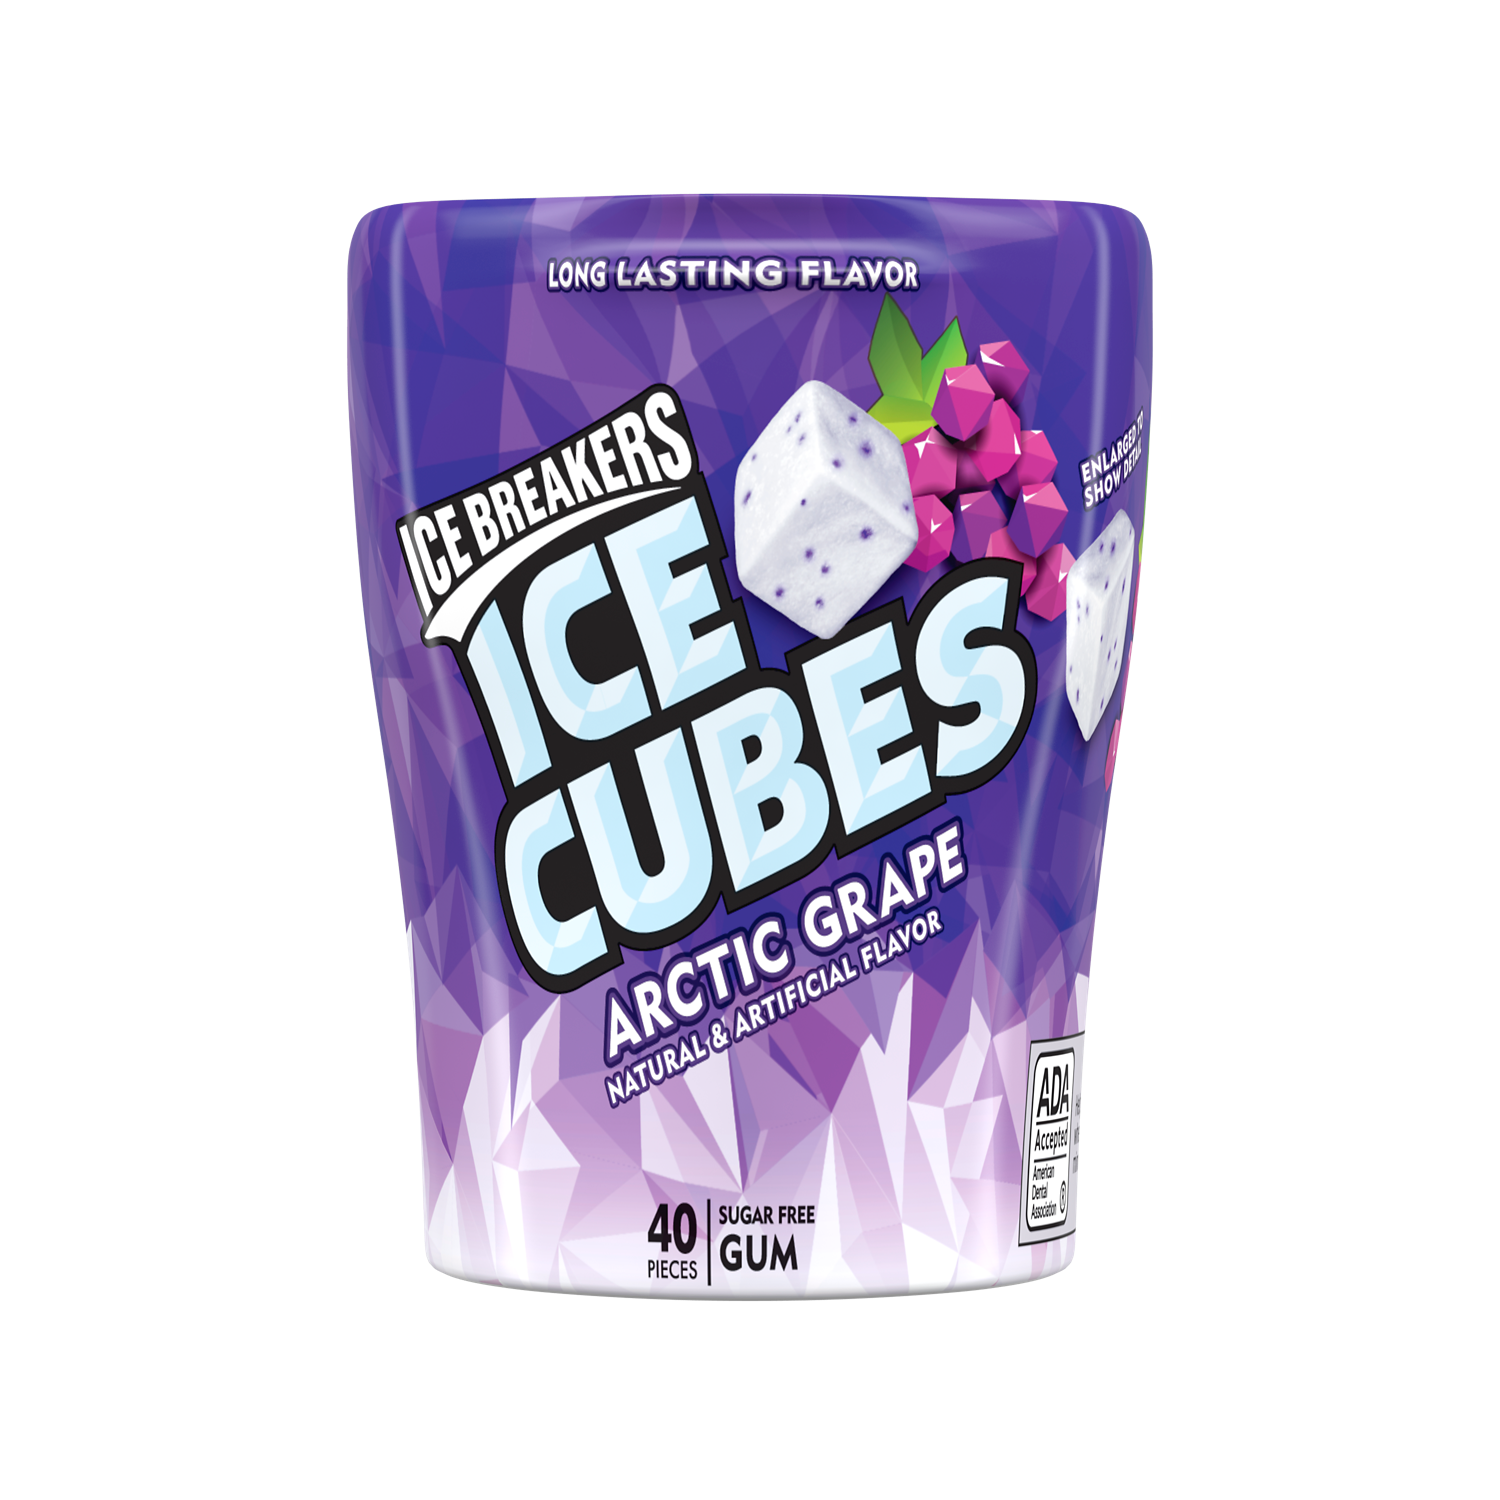 ICE BREAKERS ICE CUBES ARCTIC GRAPE Sugar Free Gum, 3.24 oz bottle, 40 pieces - Front of Package